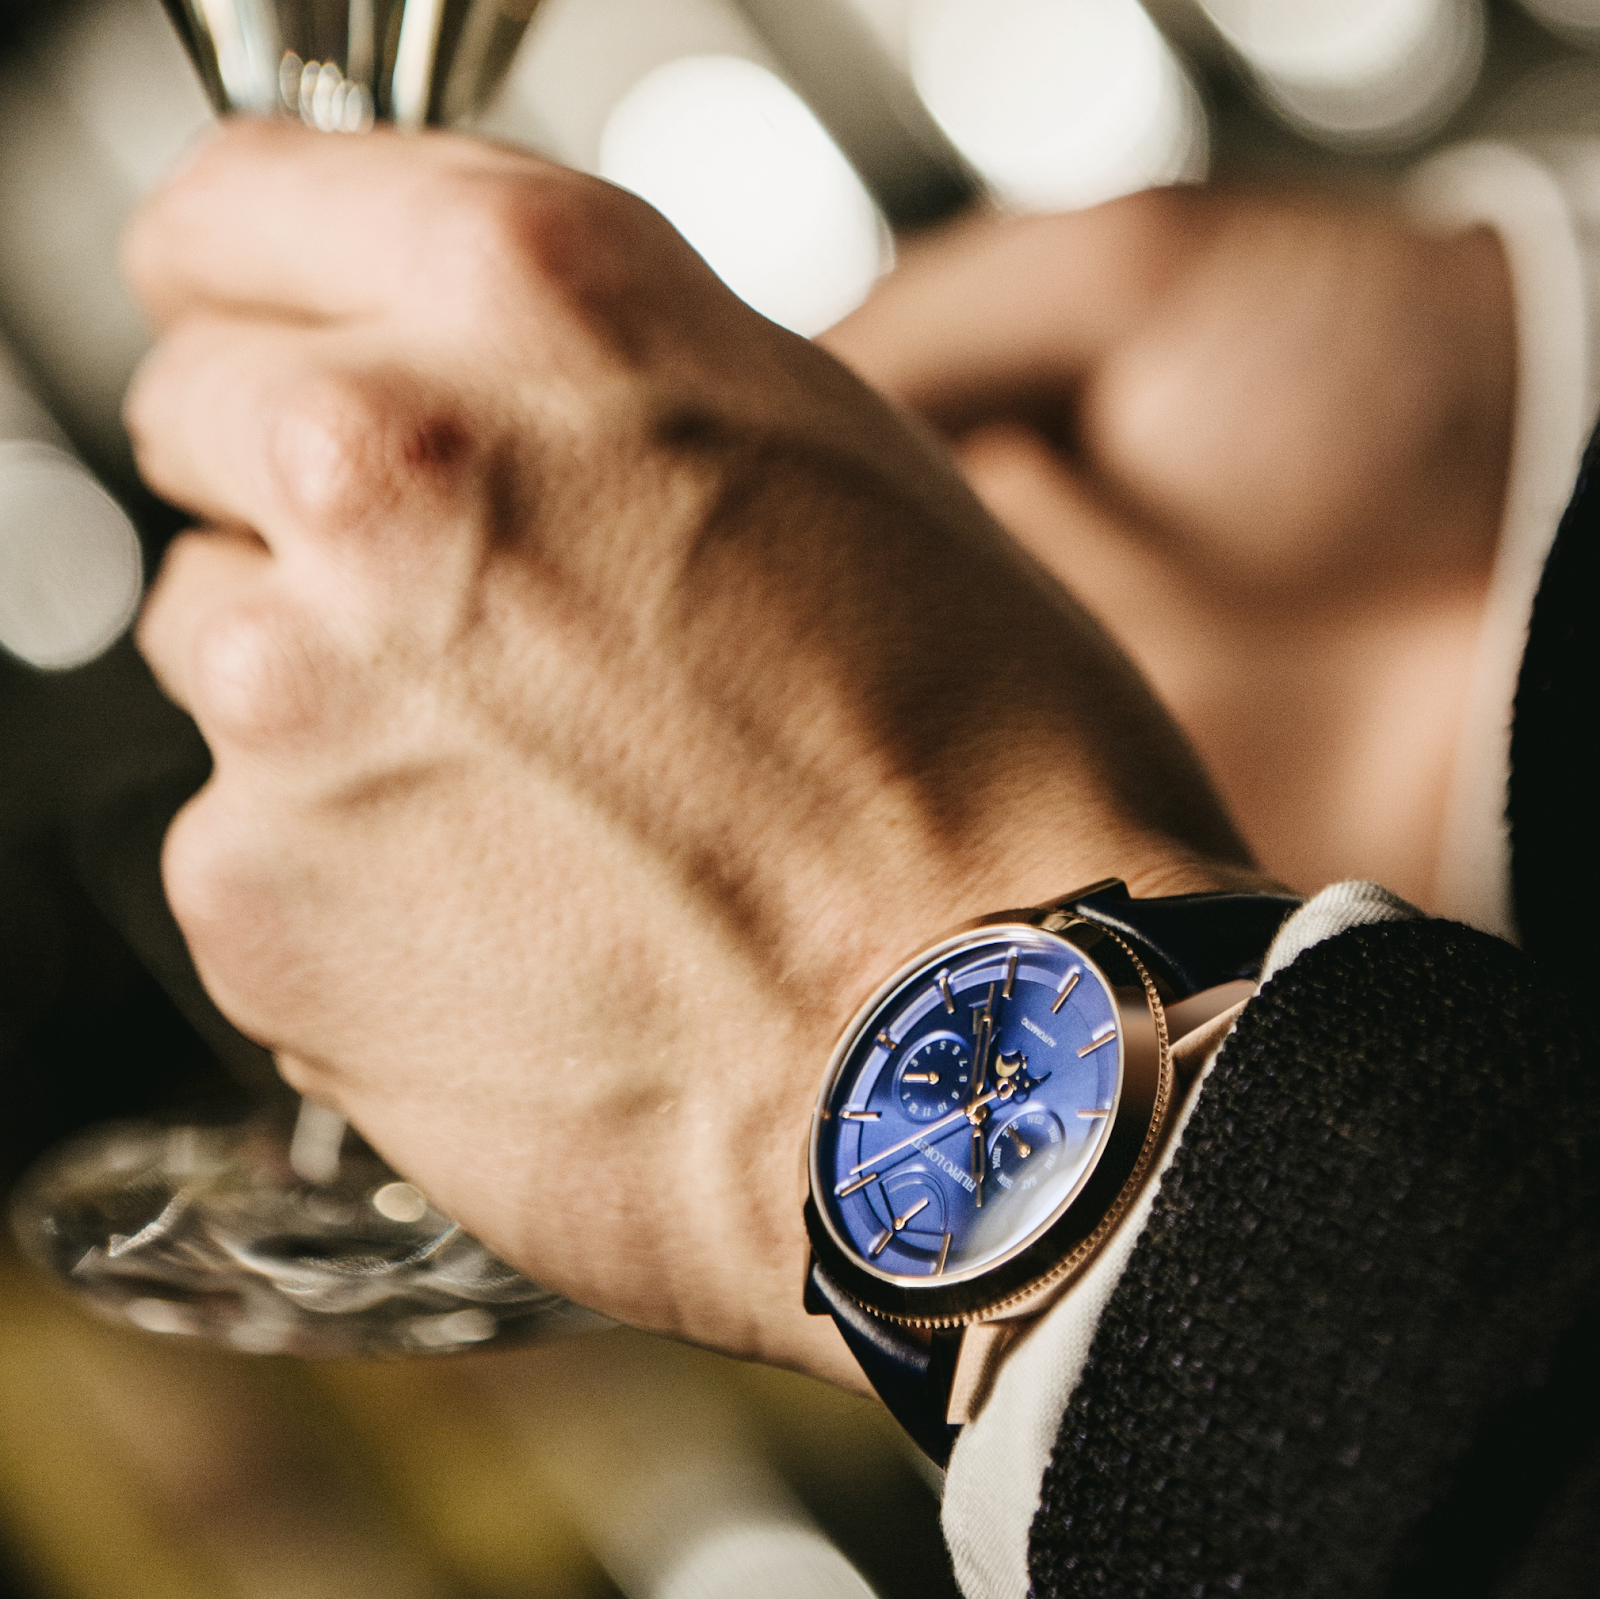 A magnificent timepiece on your wrist makes you look classy, elegant, and sophisticated.